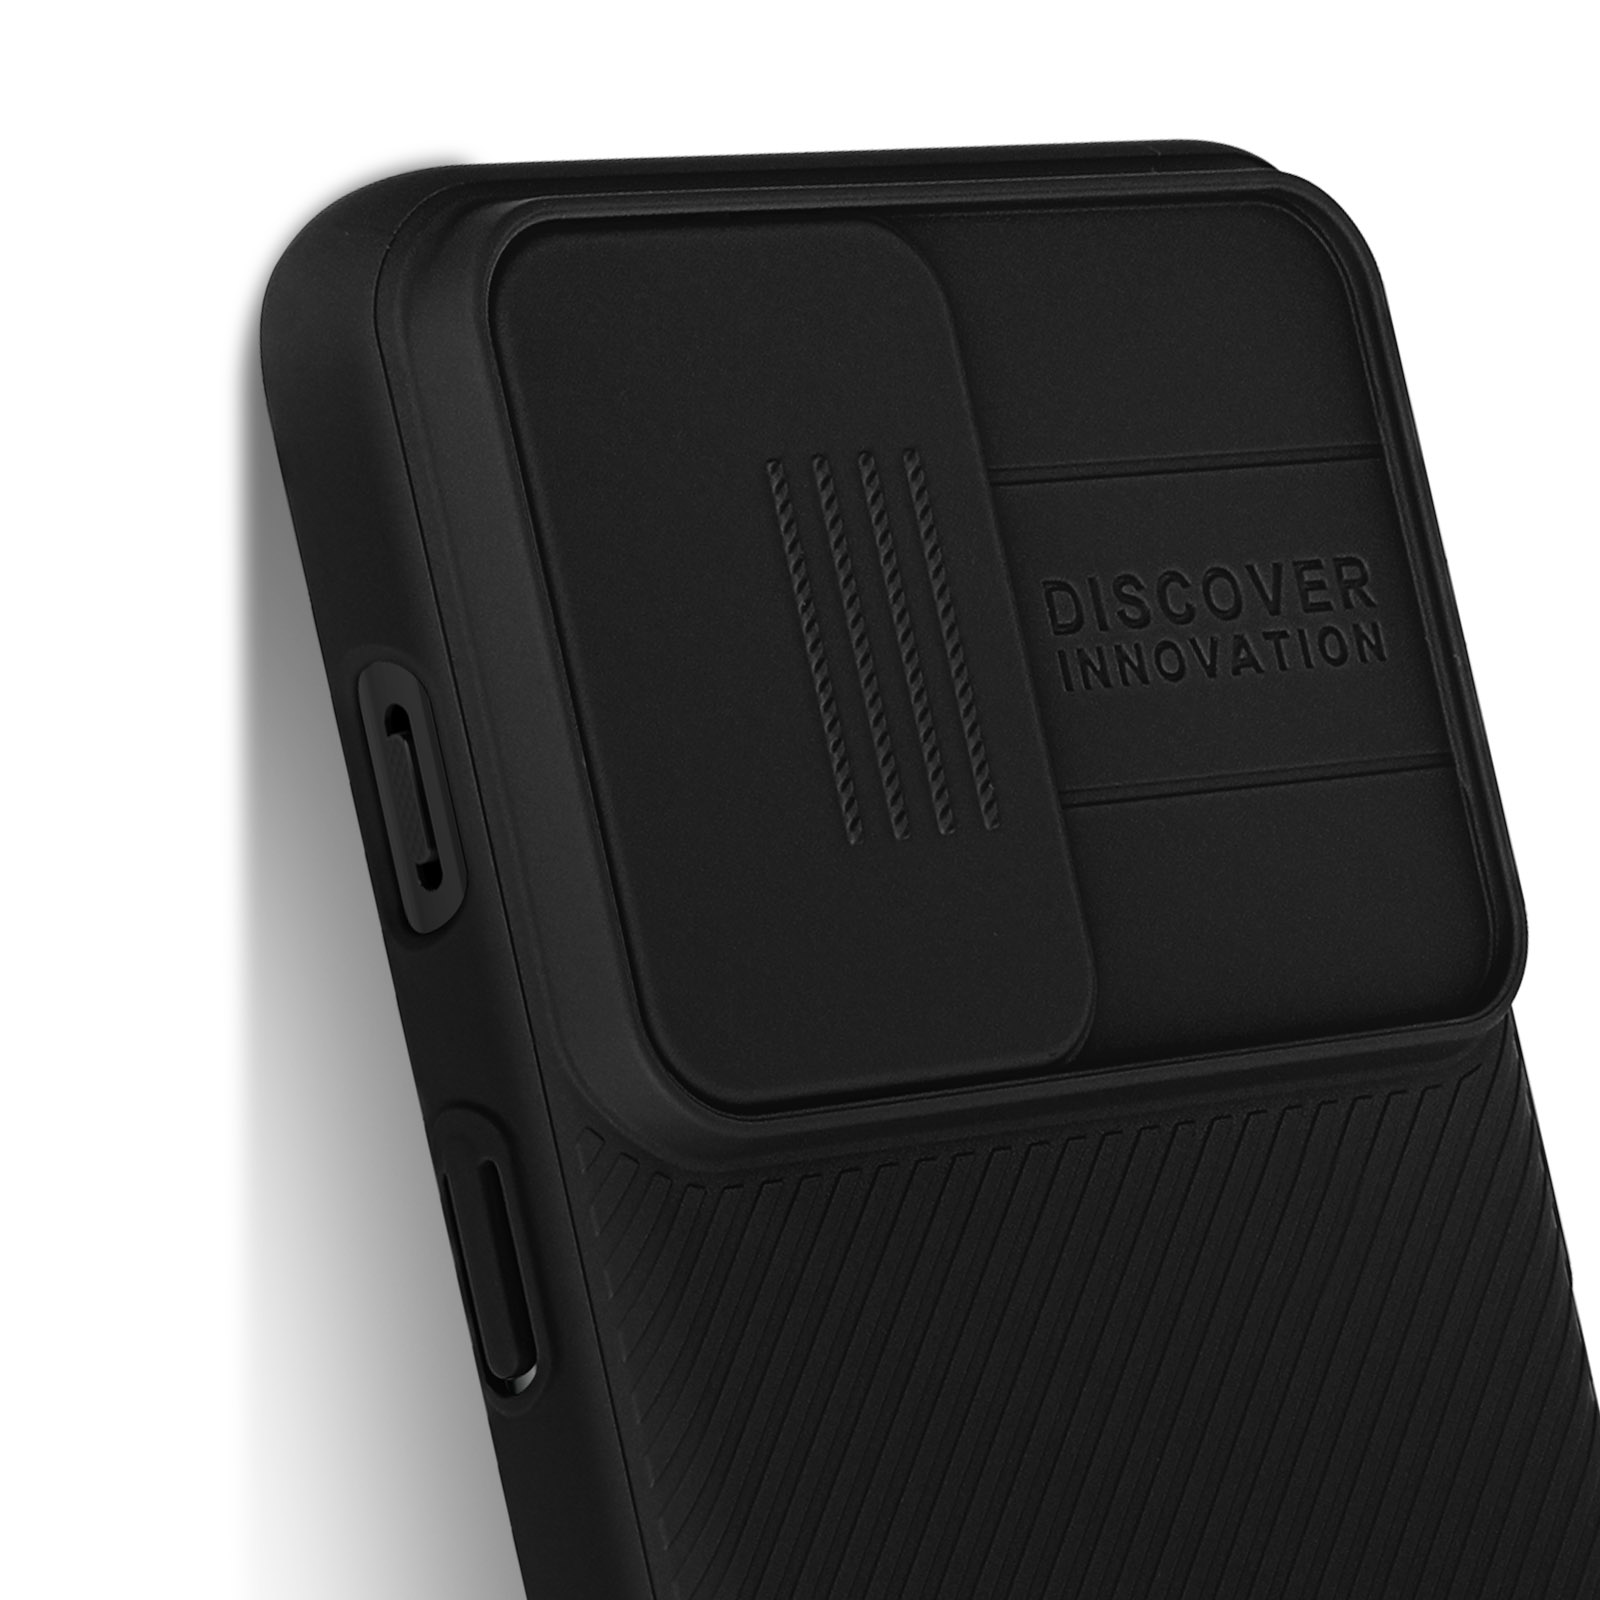 Backcover, 2T, OnePlus, Schwarz CamShield NILLKIN Nord Pro Series,